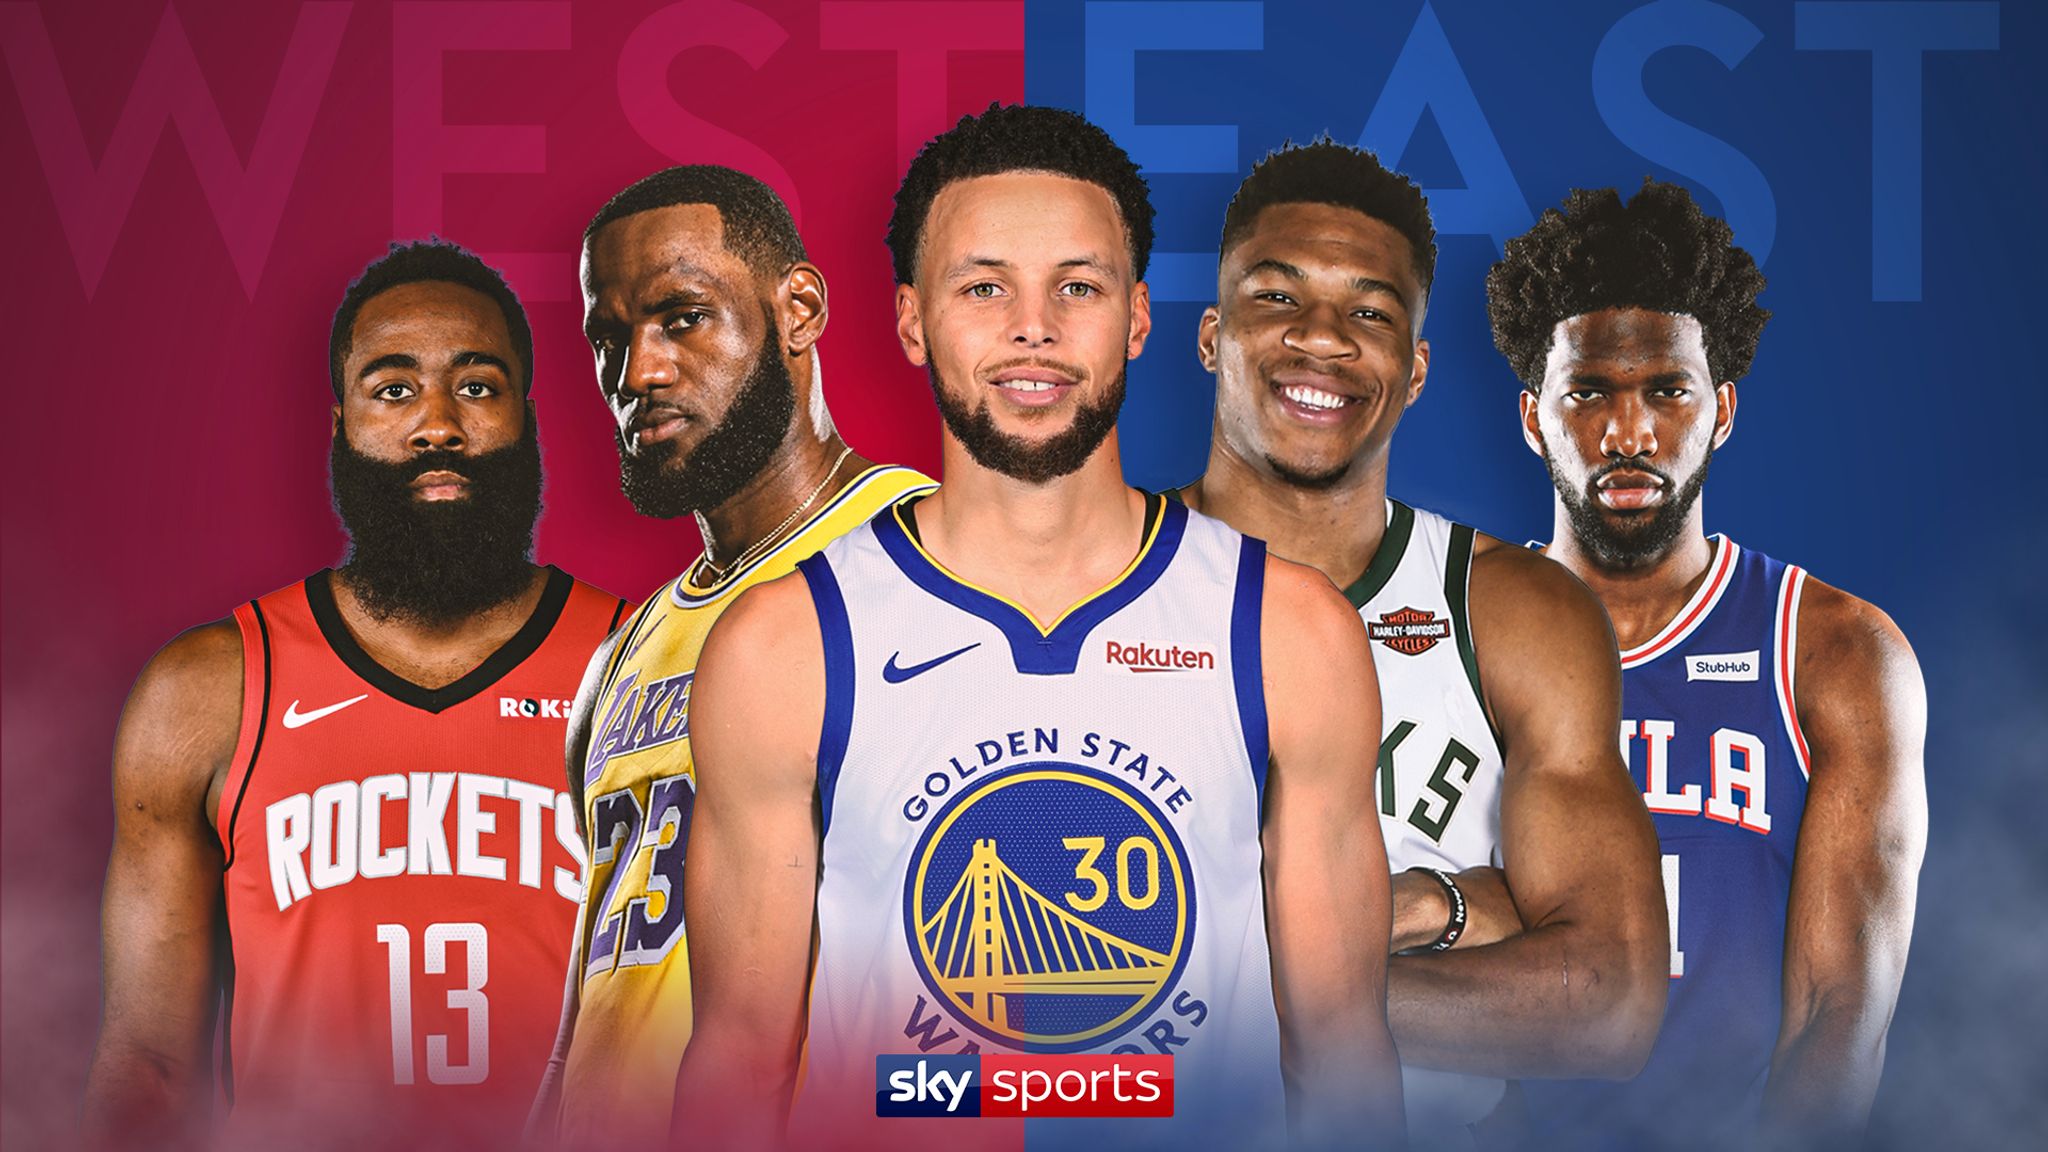 Ovie Soko joins Sky Sports as part of best-ever NBA offering NBA News Sky Sports